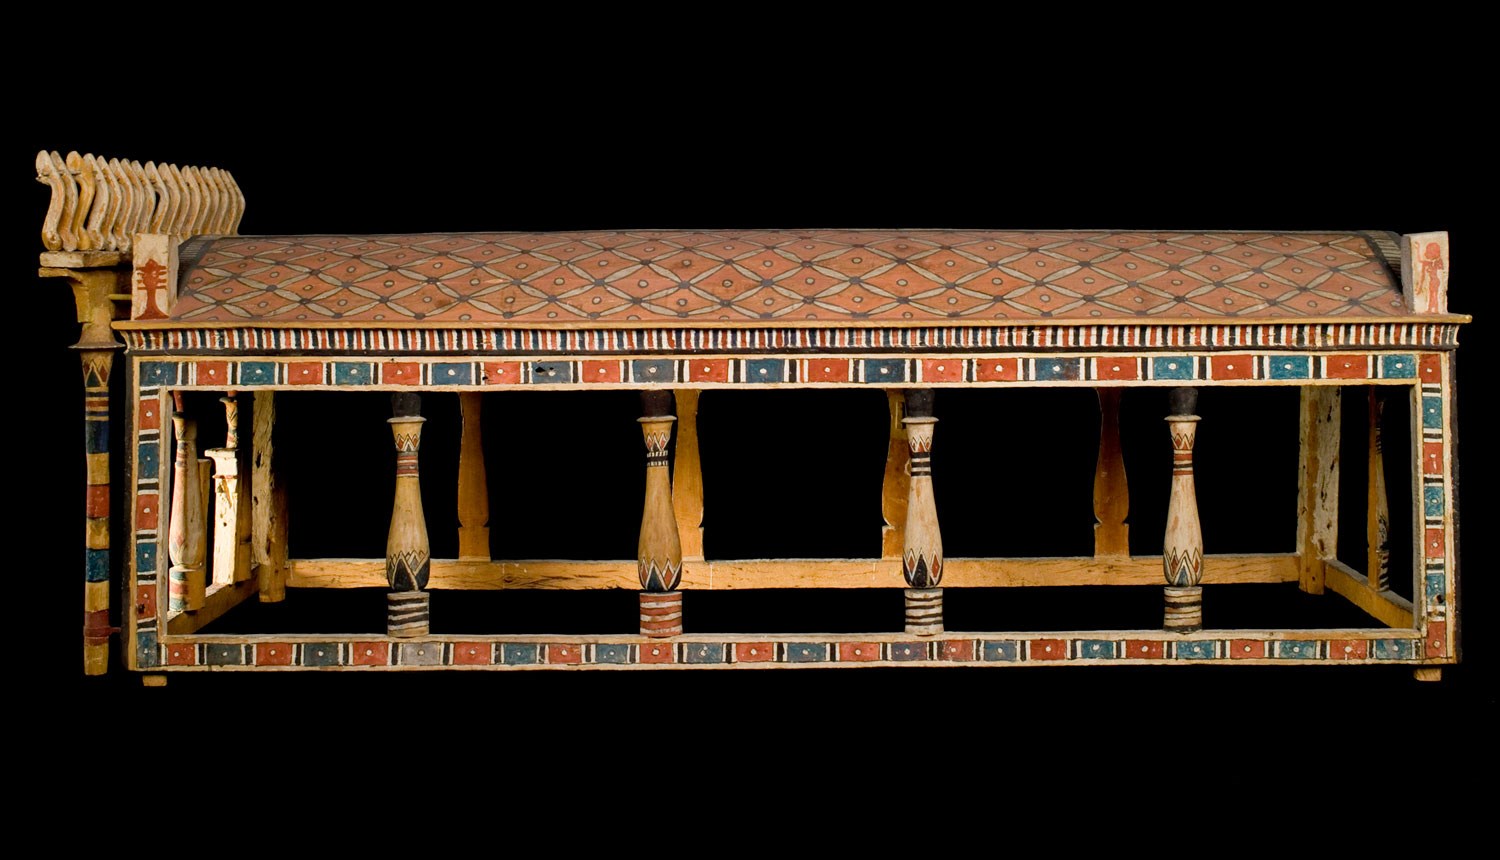 Ancient Egyptian Funerary Canopy of sycomore-fig wood painted in red